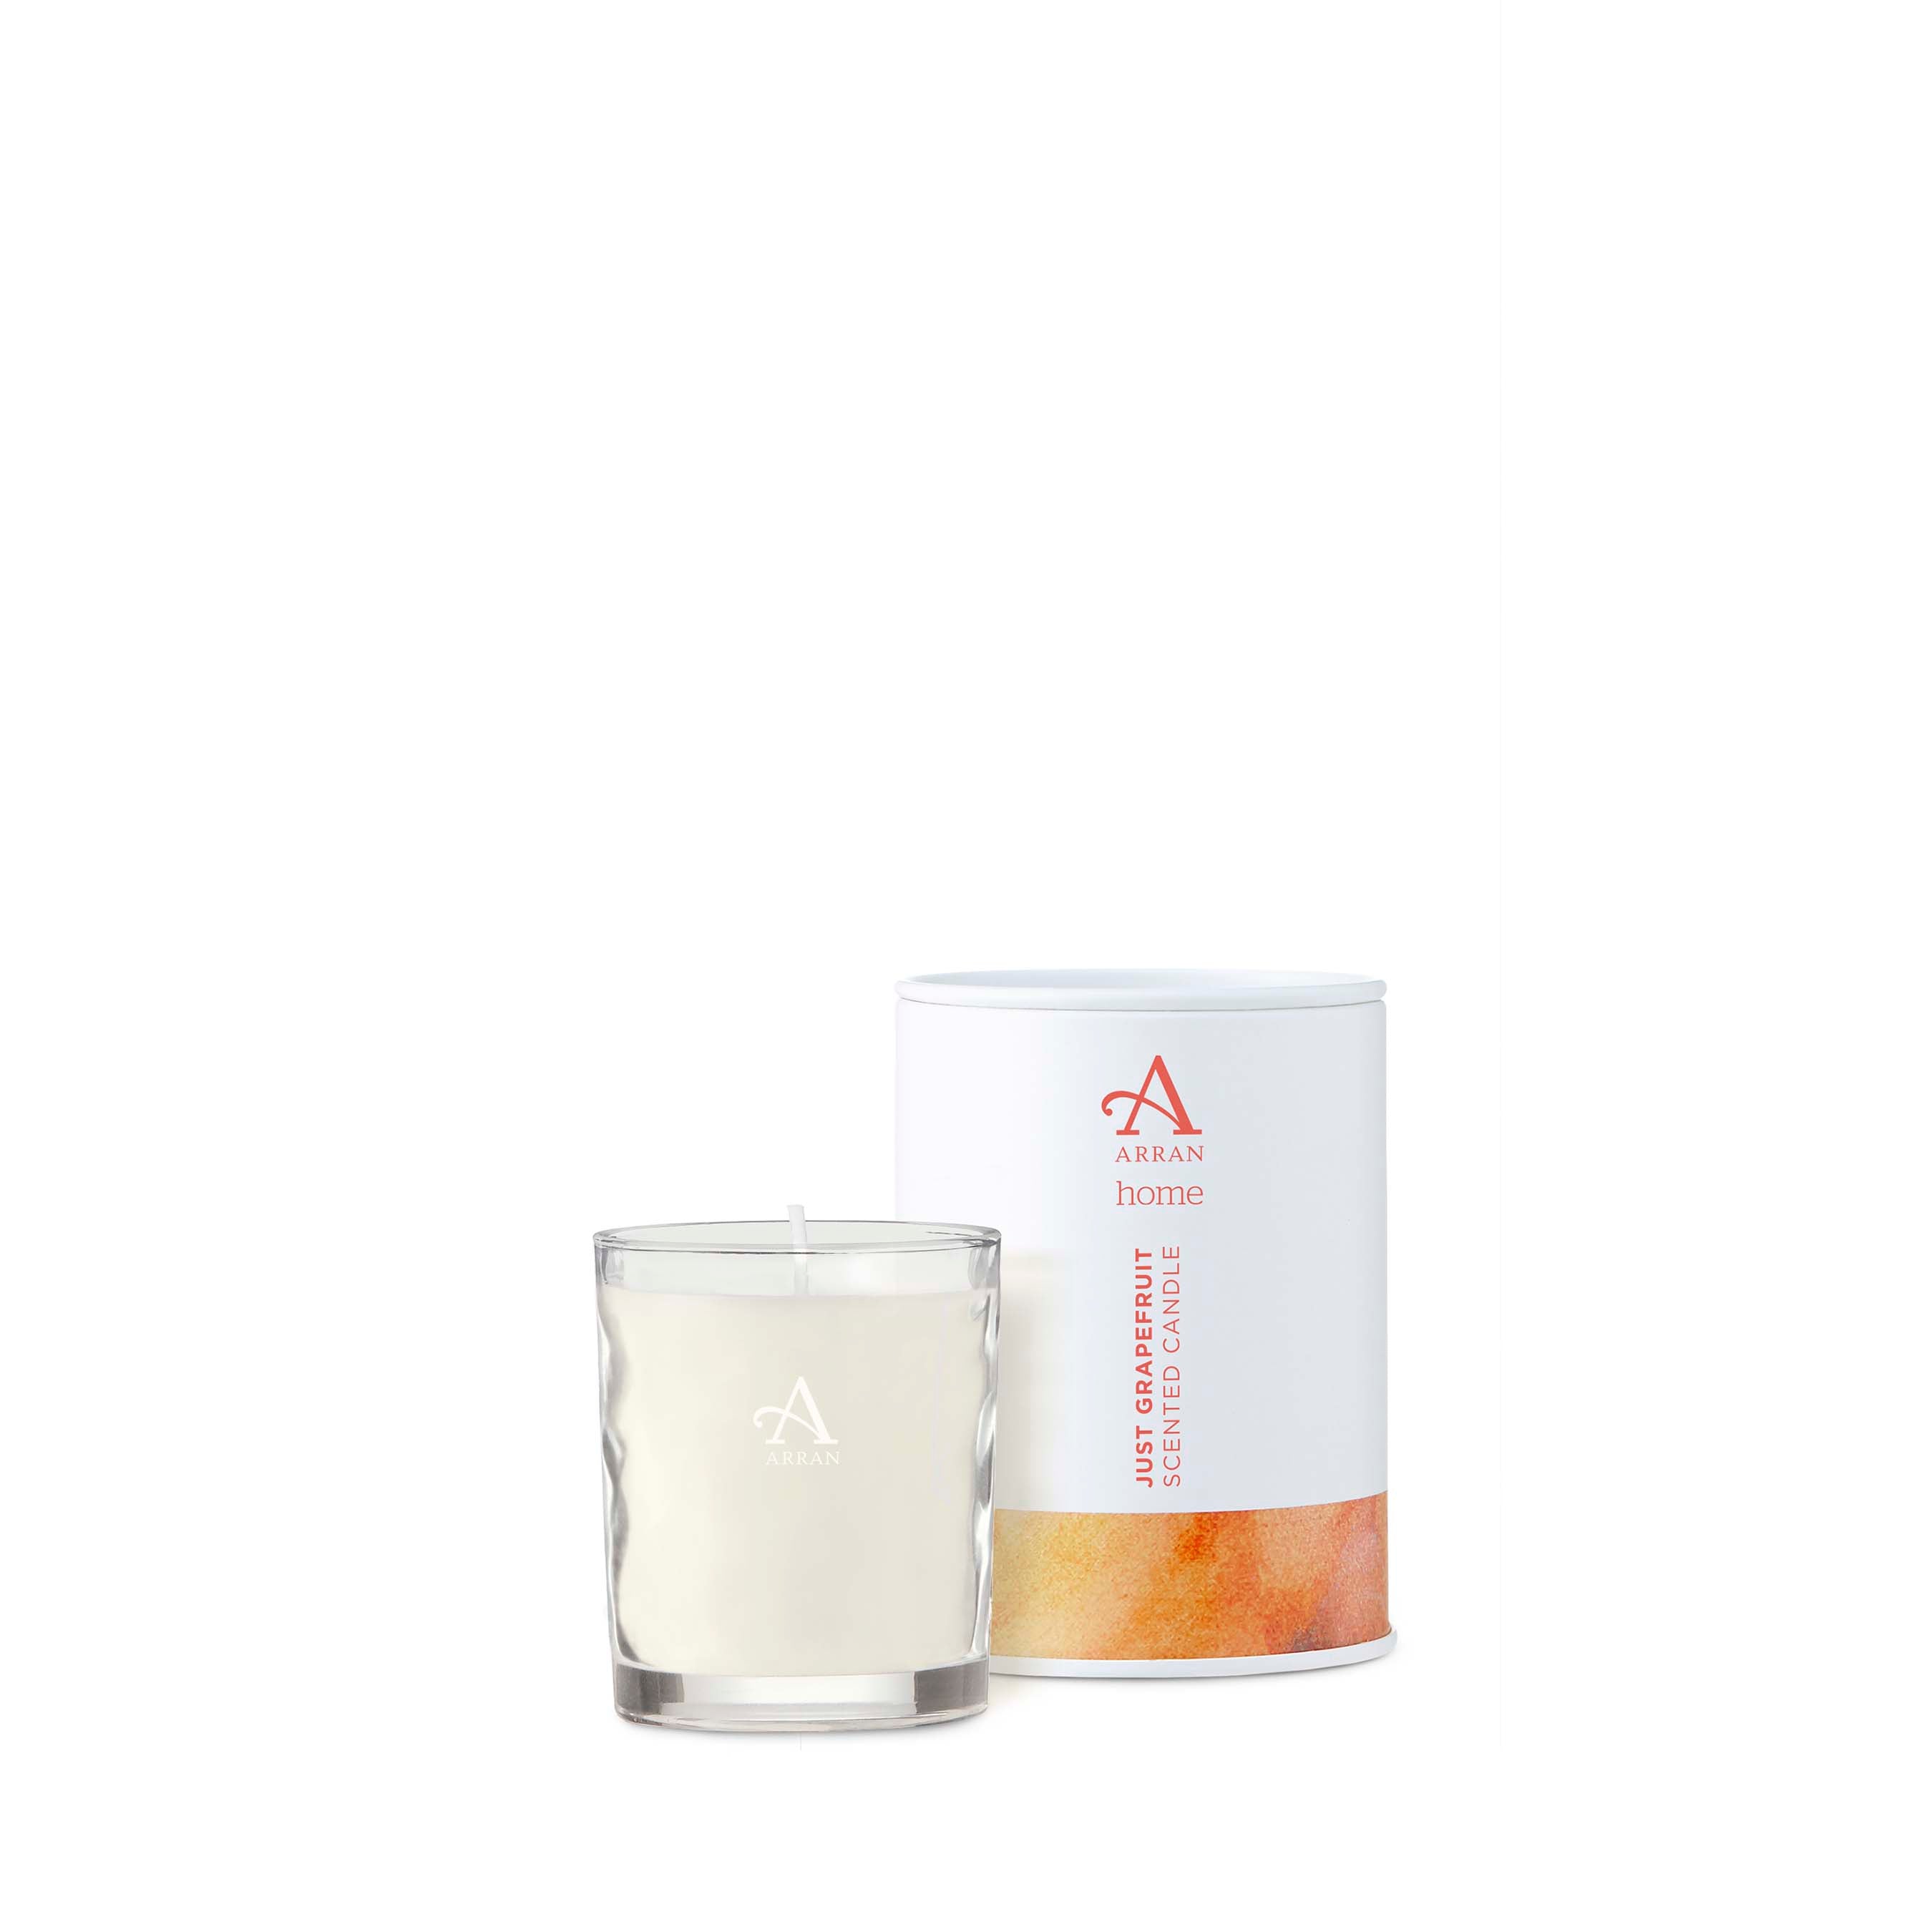 An image of ARRAN Just Grapefruit Scented Candle 8cl | Made in Scotland | Grapefruit Scent